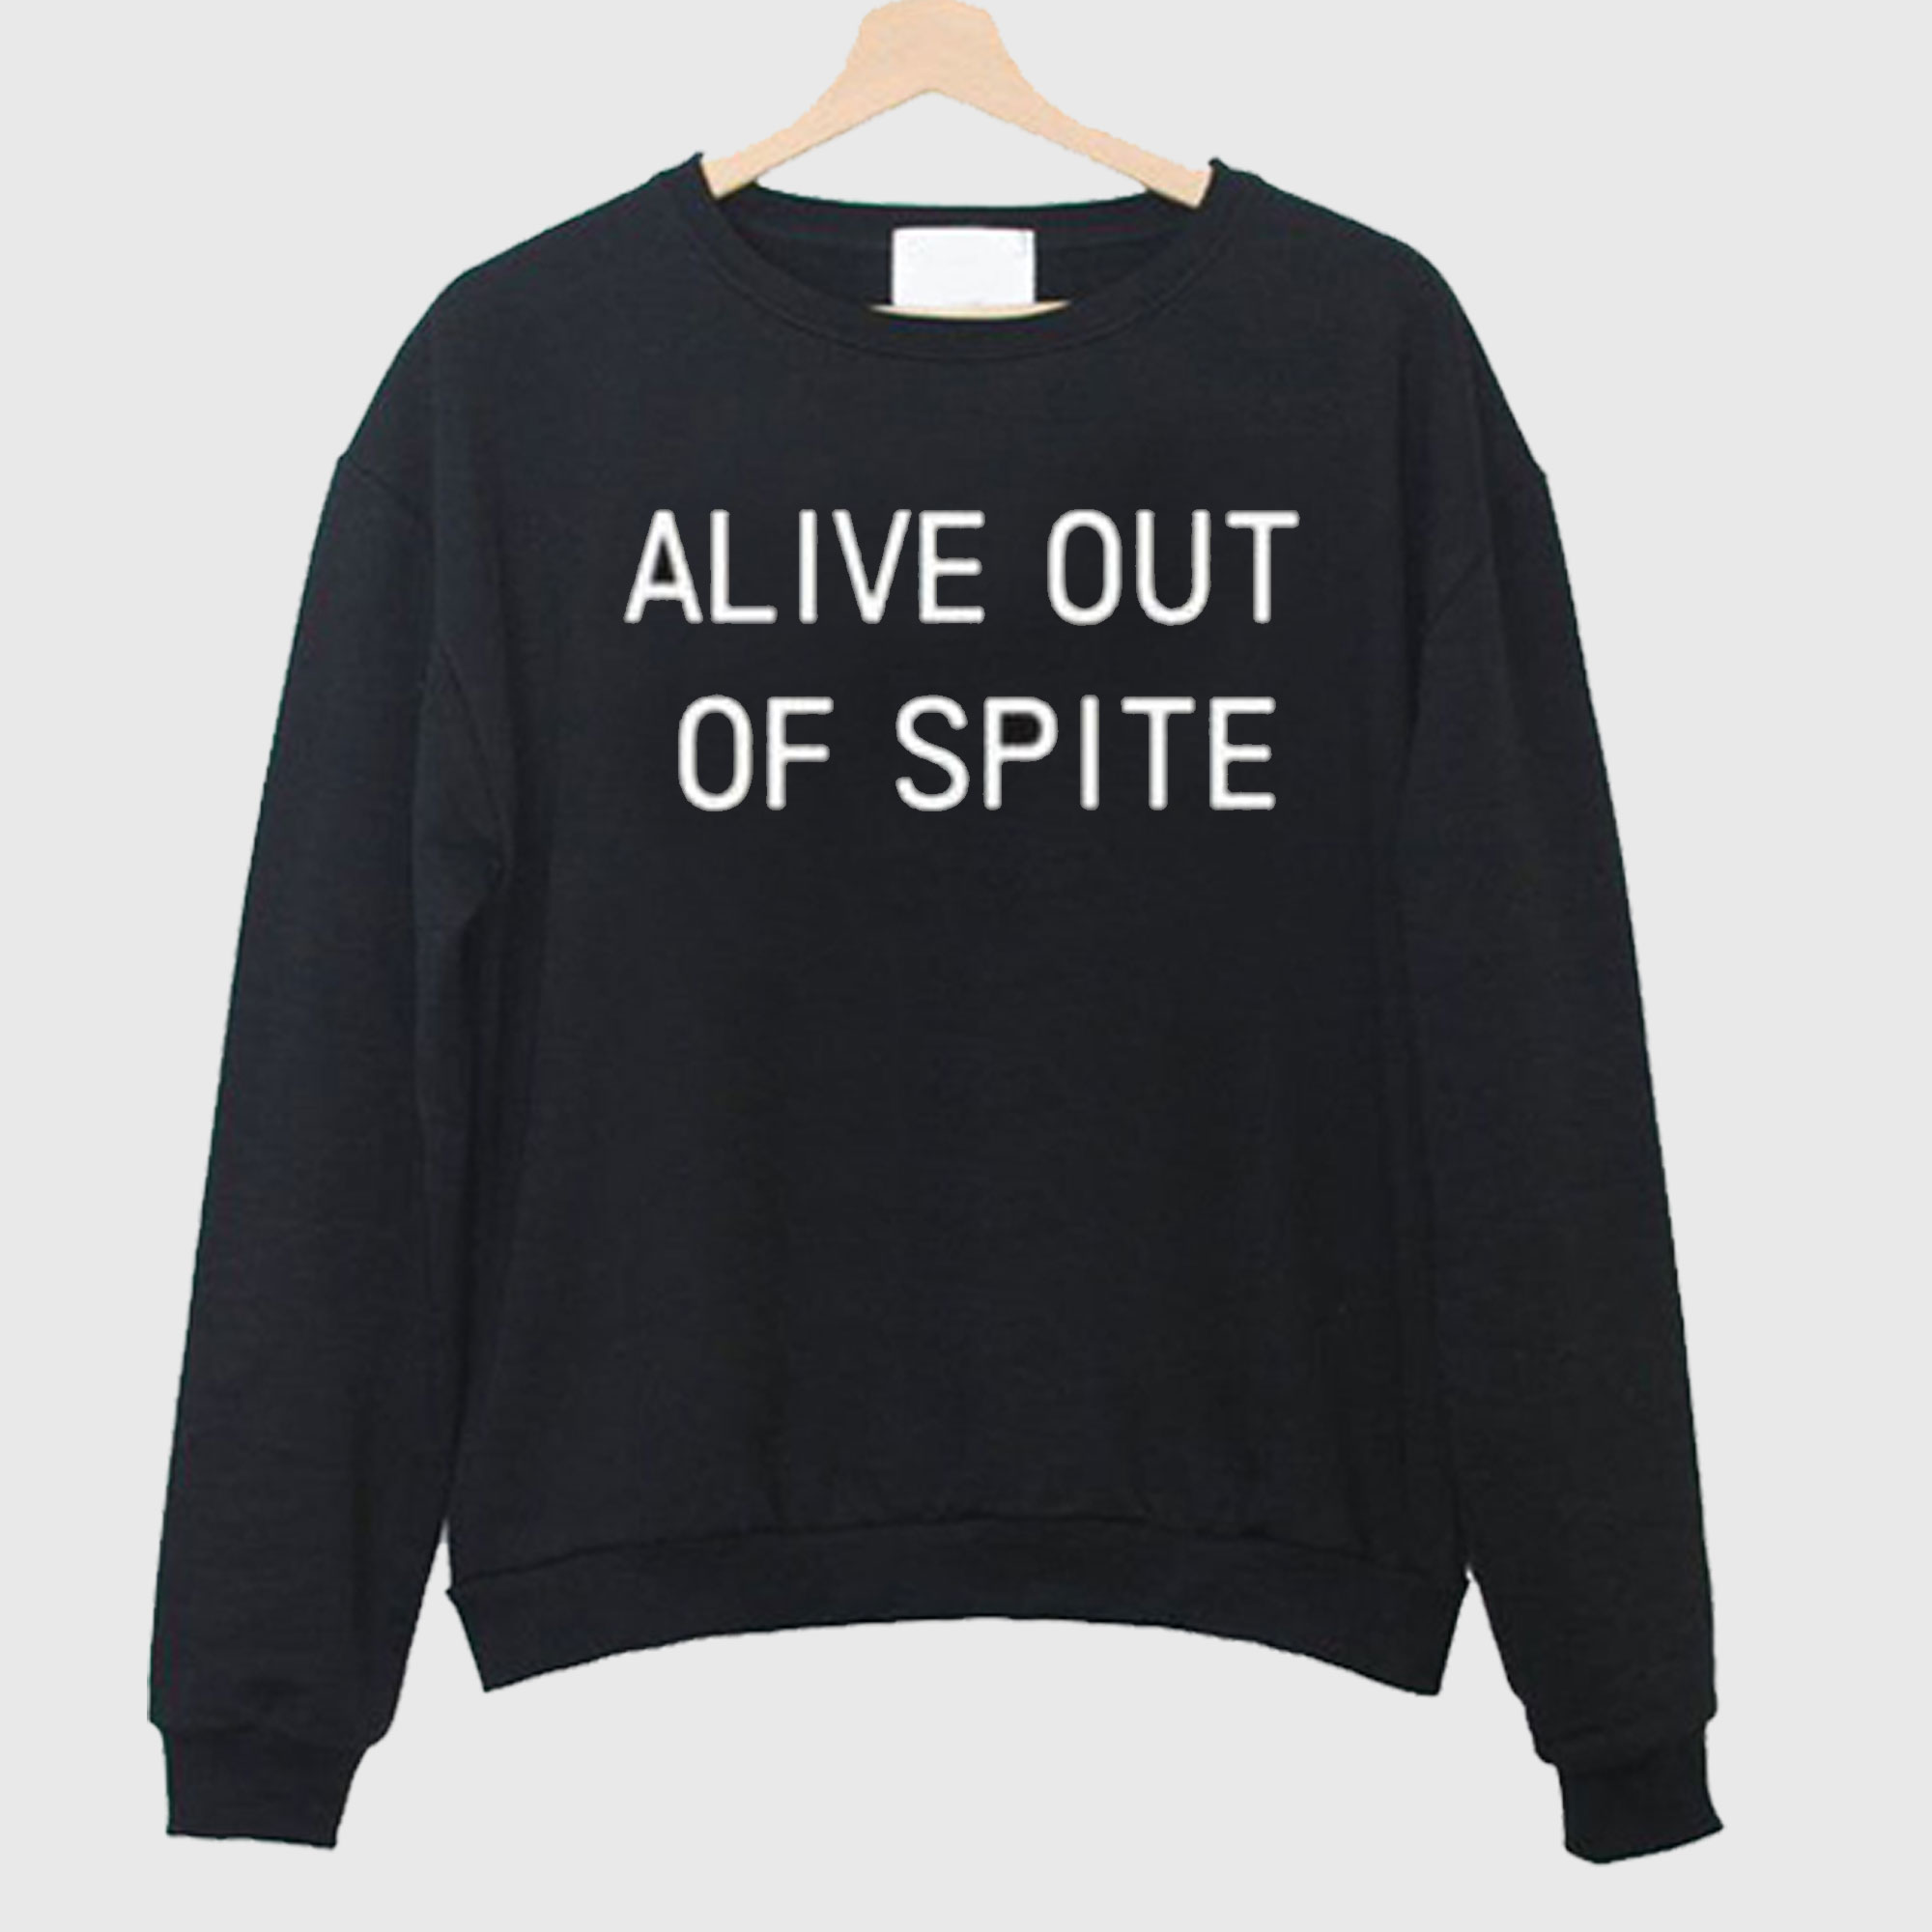 Alive Out Of Spite Sweatshirt.